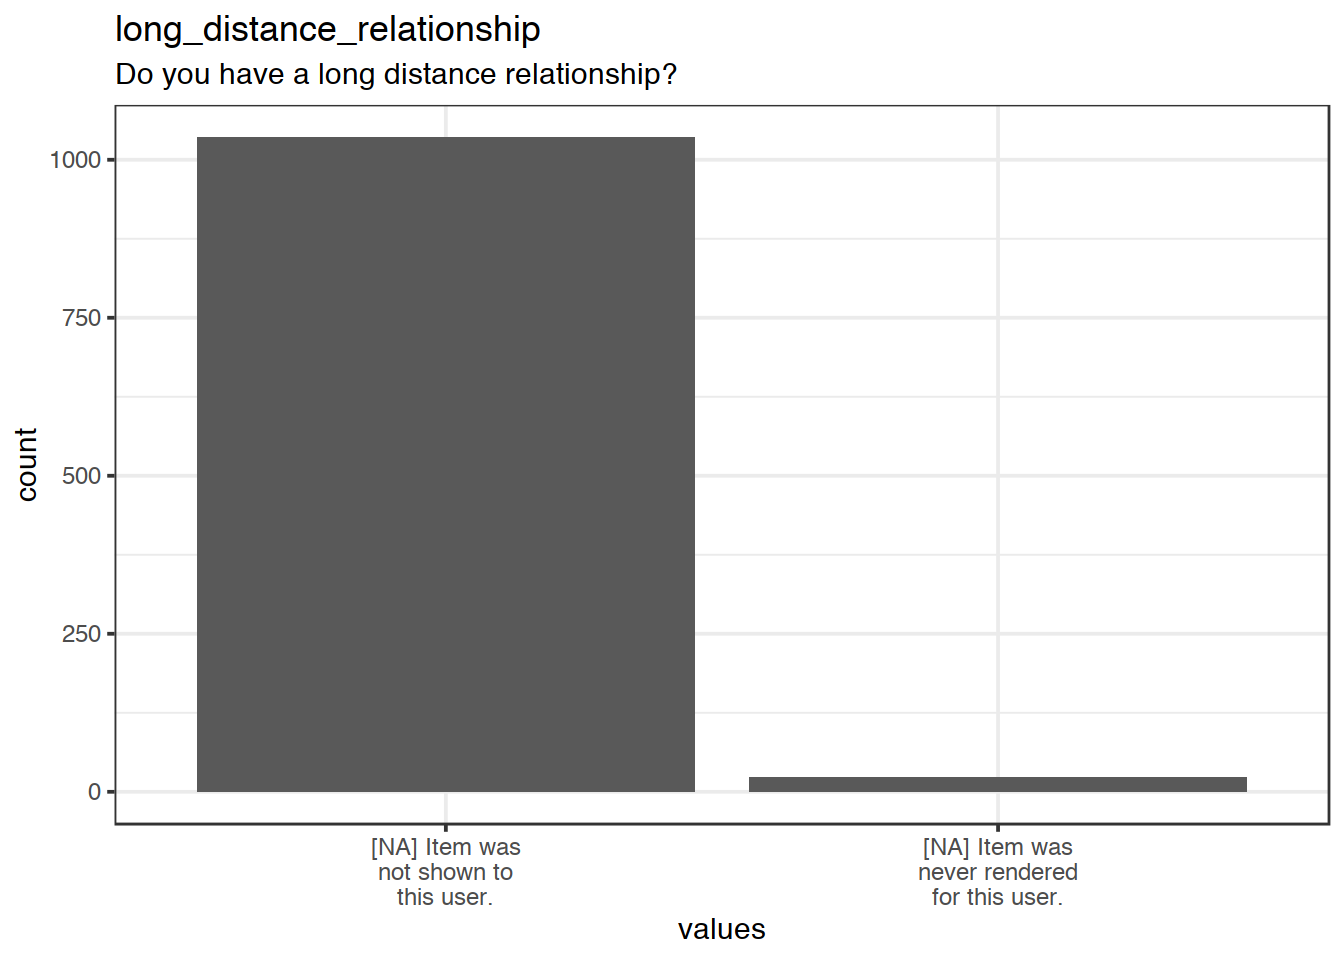 Plot of missing values for long_distance_relationship